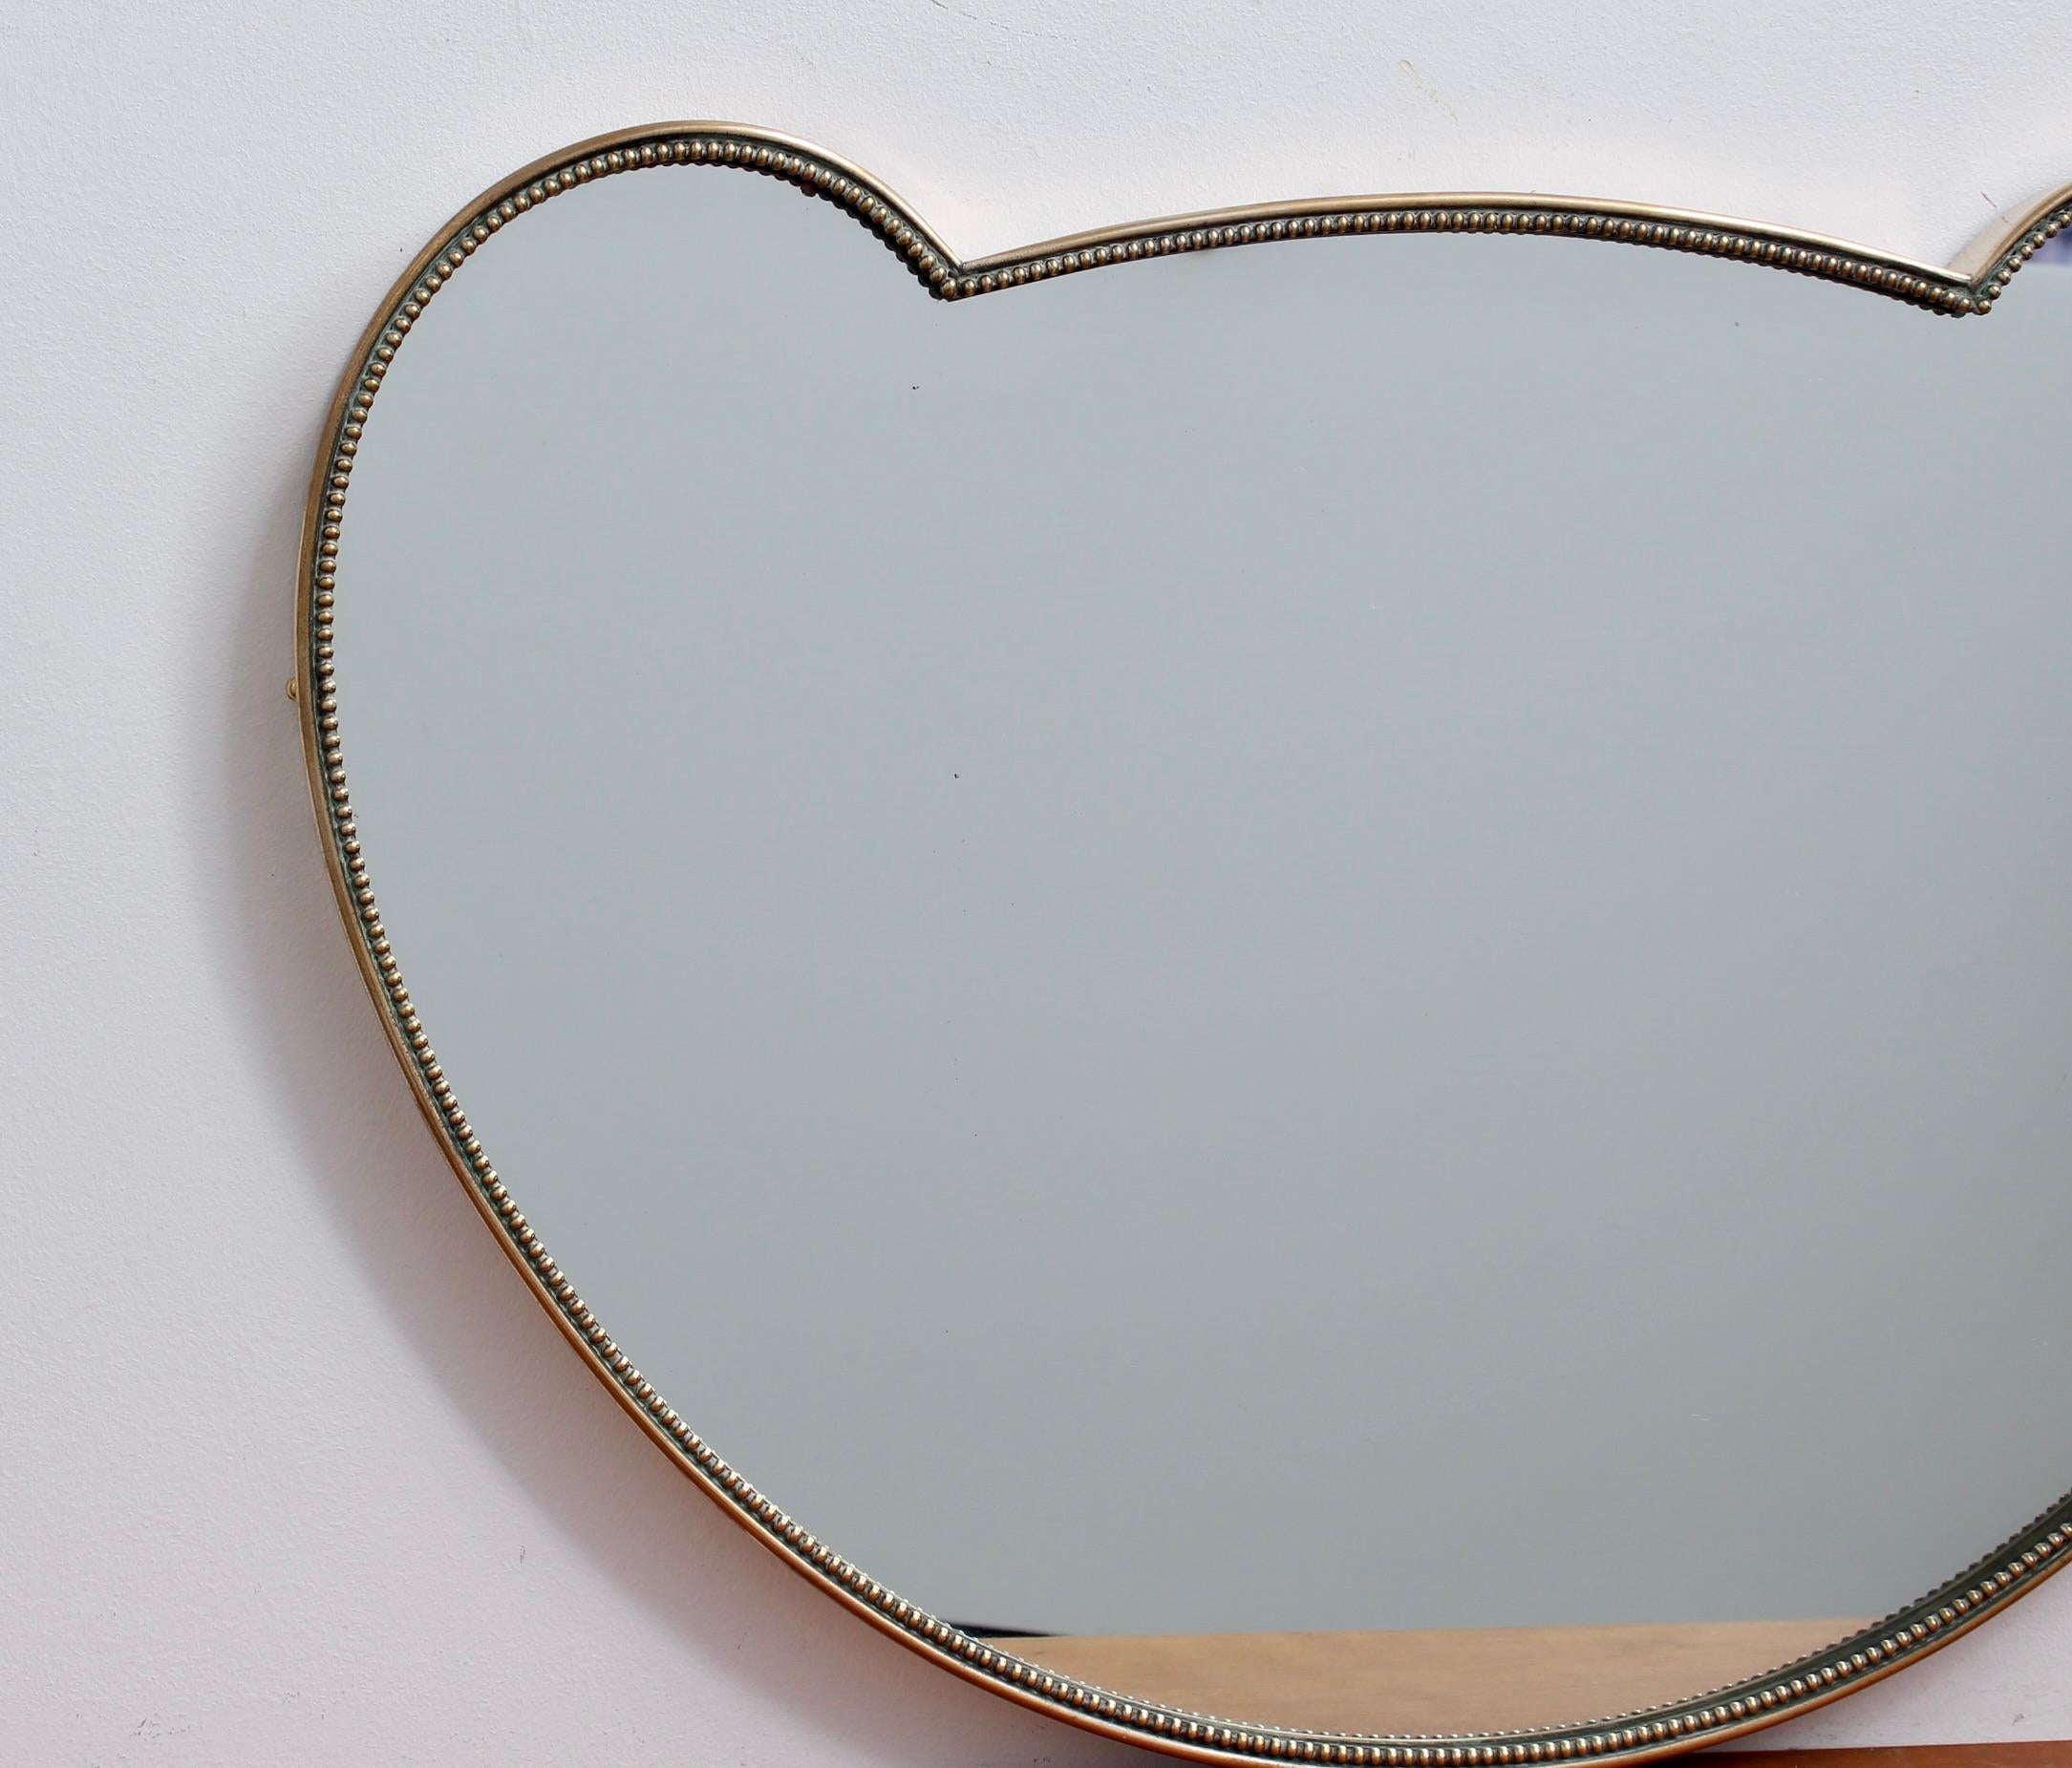 Small Mid-Century Italian wall mirror with brass frame (circa 1950s). The mirror is of a rare shape (Mickey Mouse ears?) combining sumptuous curves and a lovely beading surrounding the frame to add further interest. It is classically elegant and